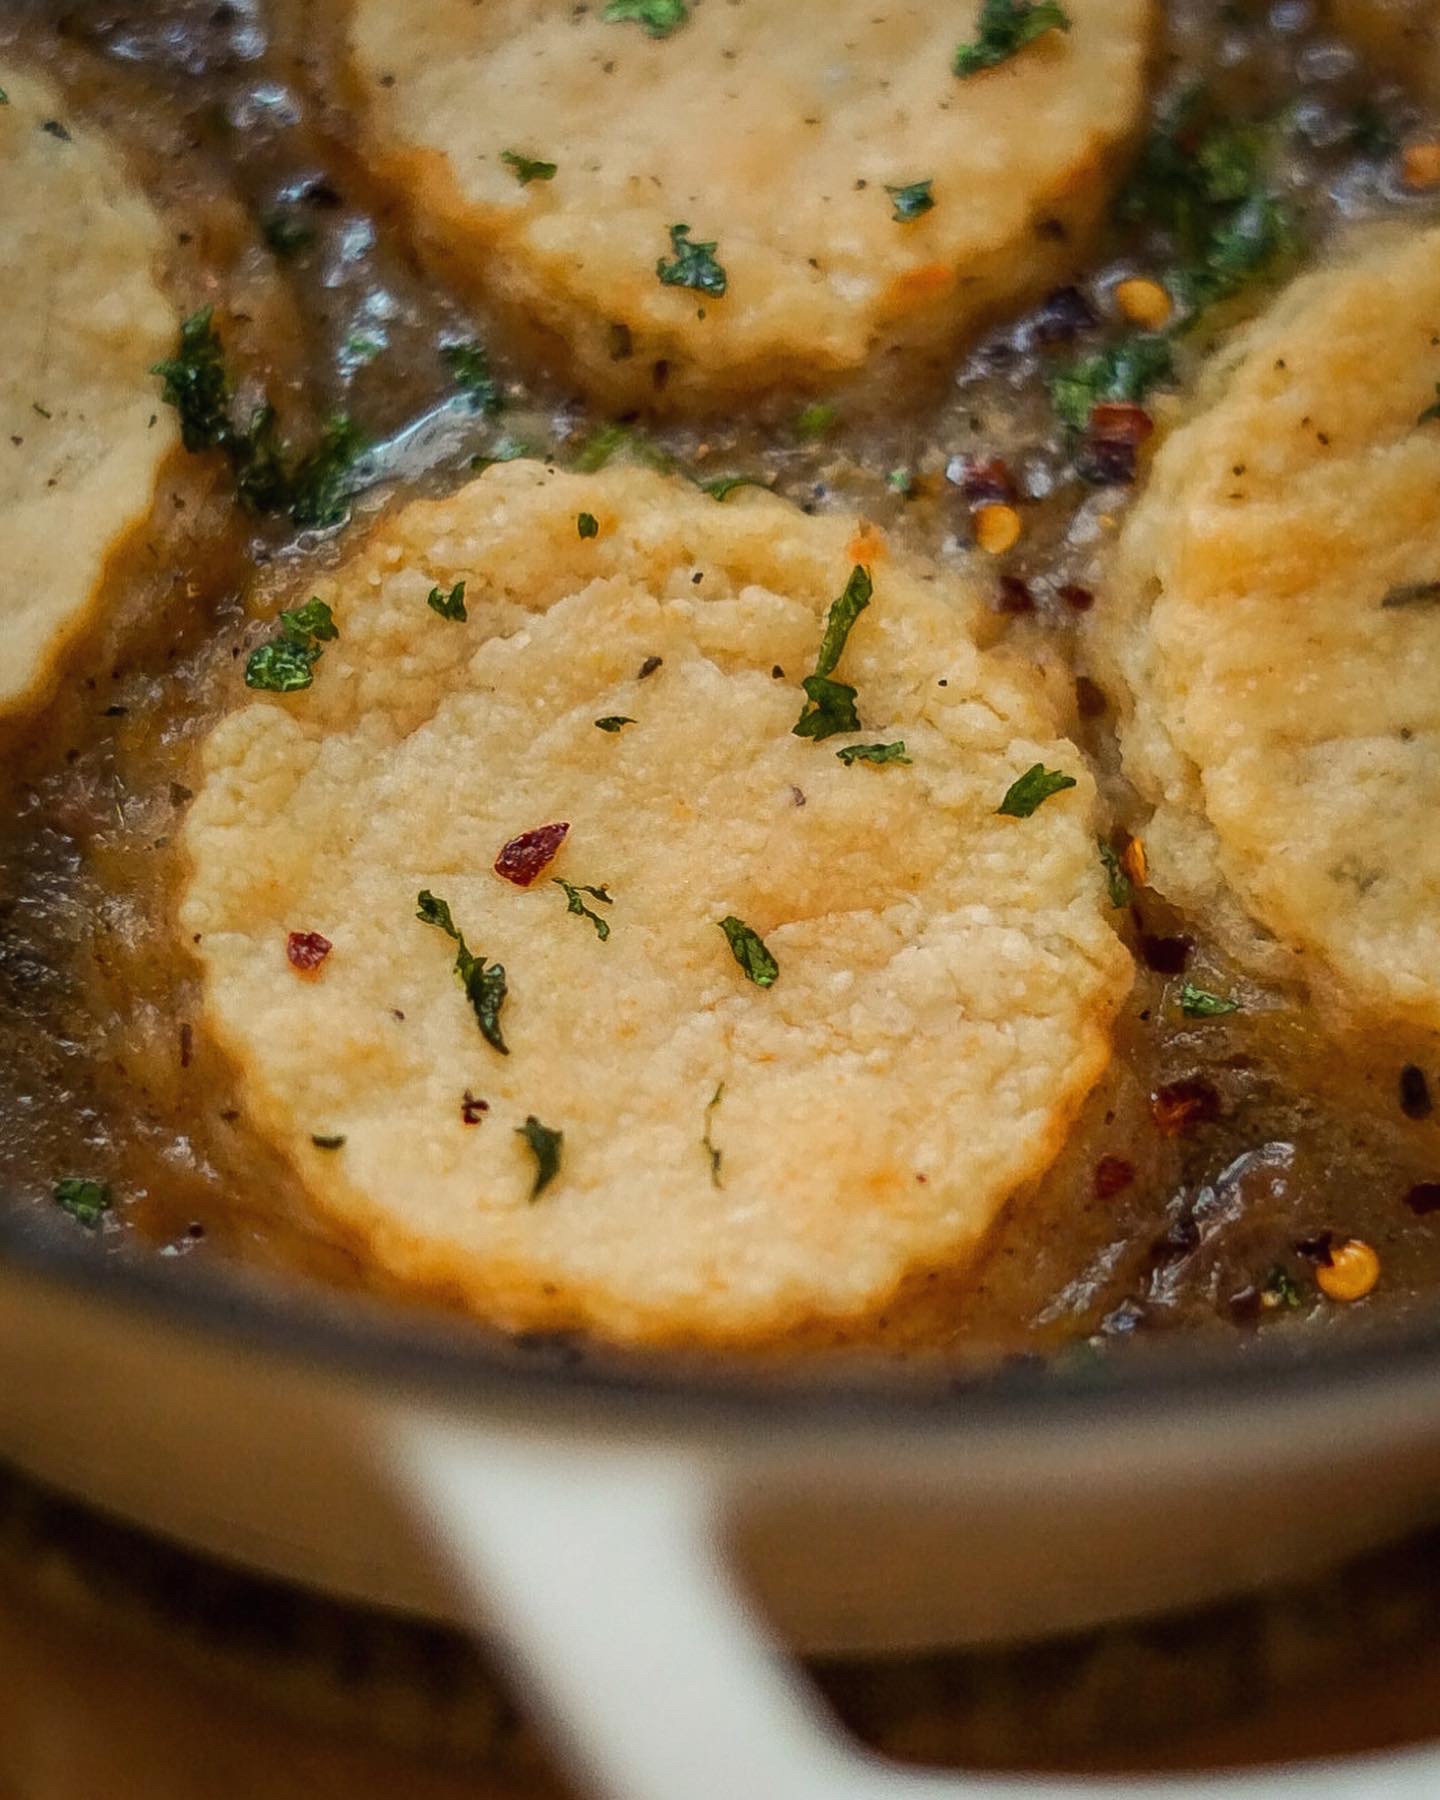 Vegan Pumpkin and Potato Stew with Rosemary Biscuits